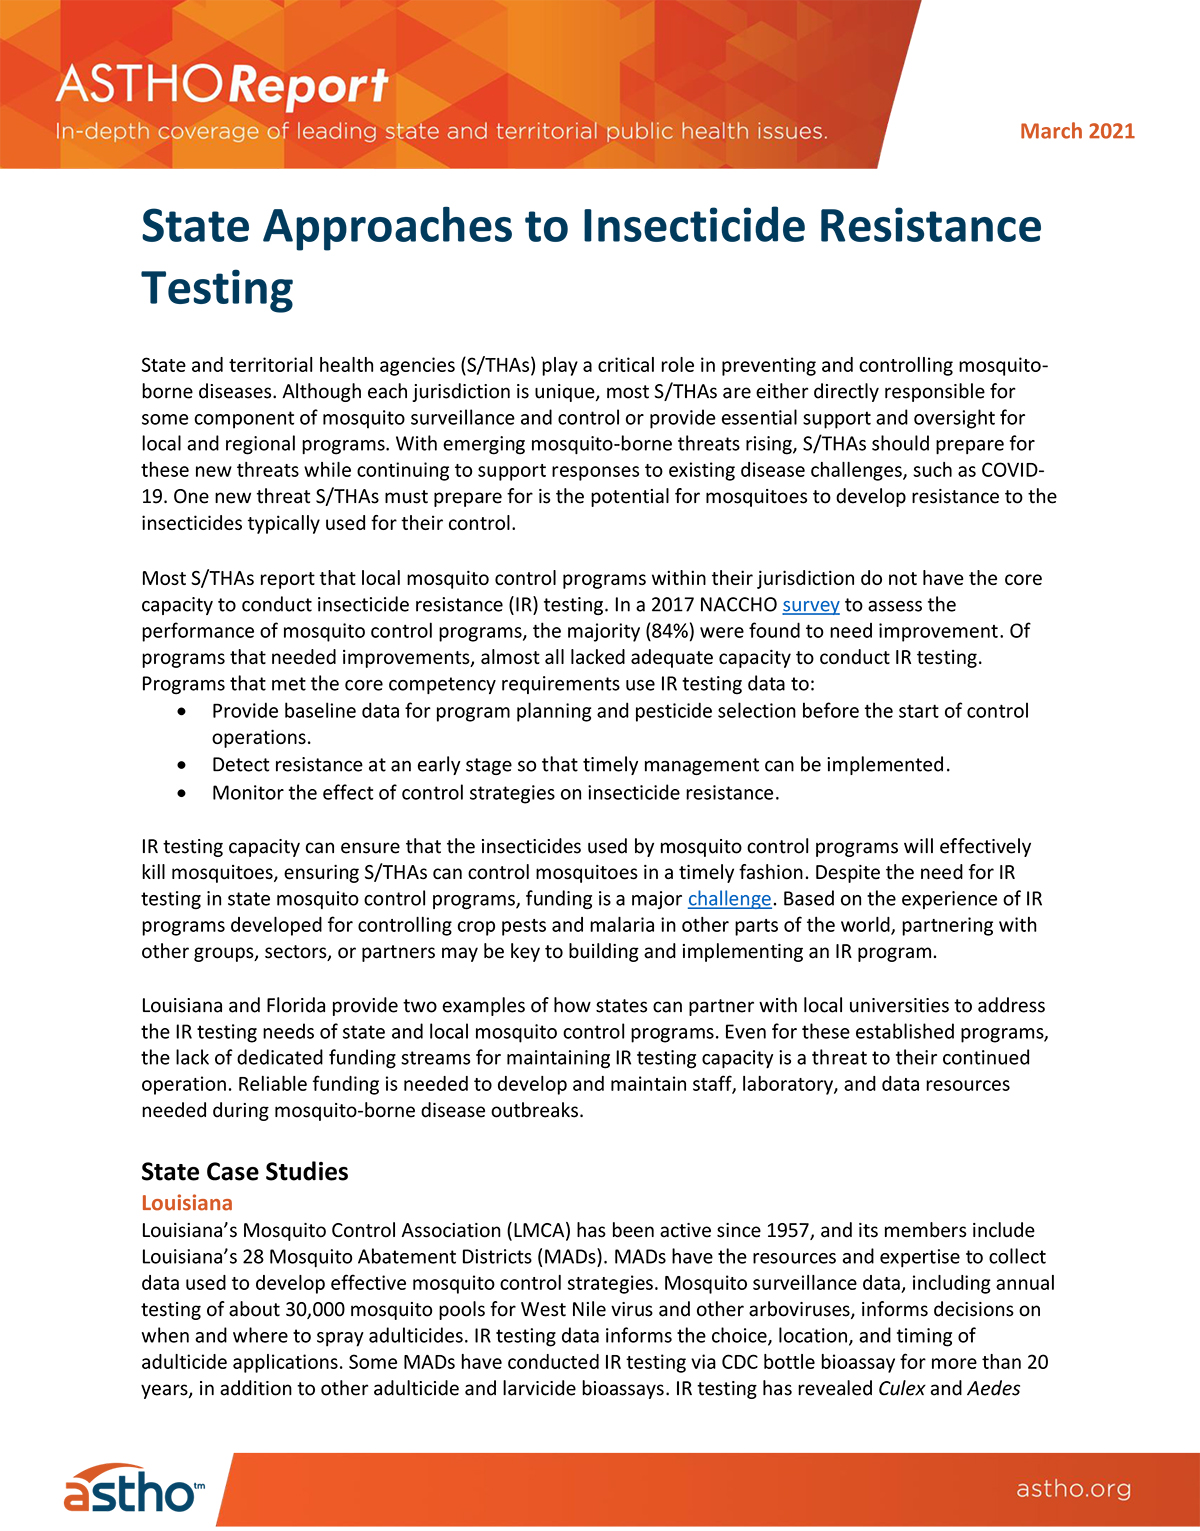 ASTHOReport: State Approaches to Insecticide Resistance Testing